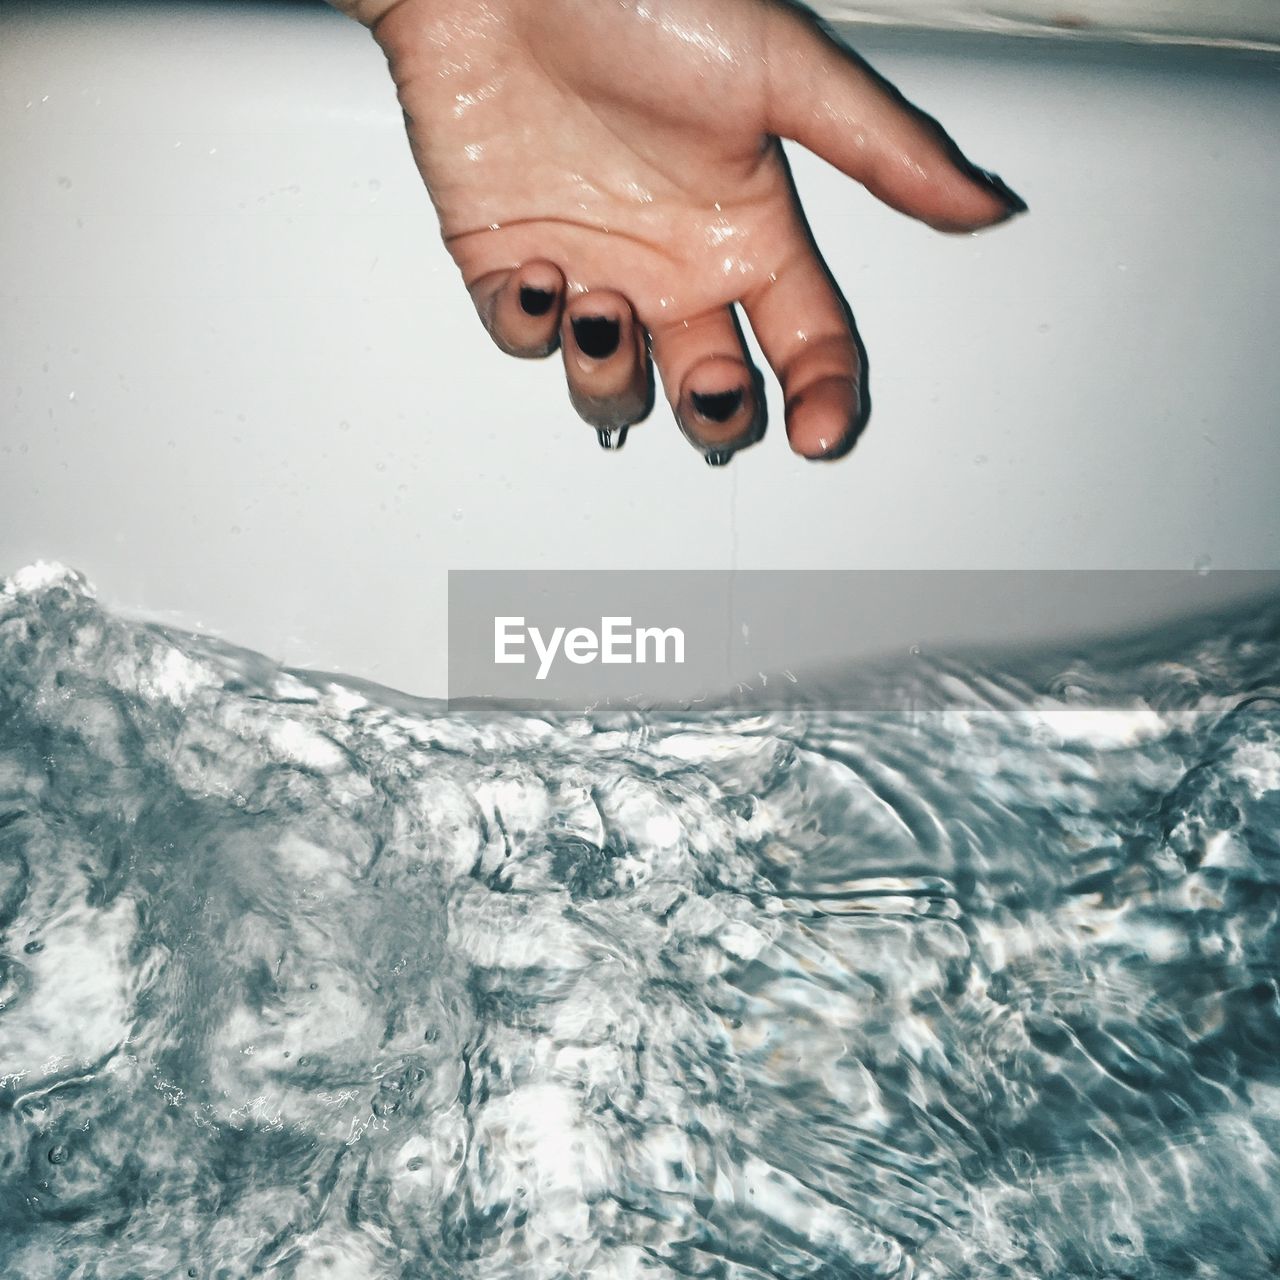 Cropped image of woman washing hand in water